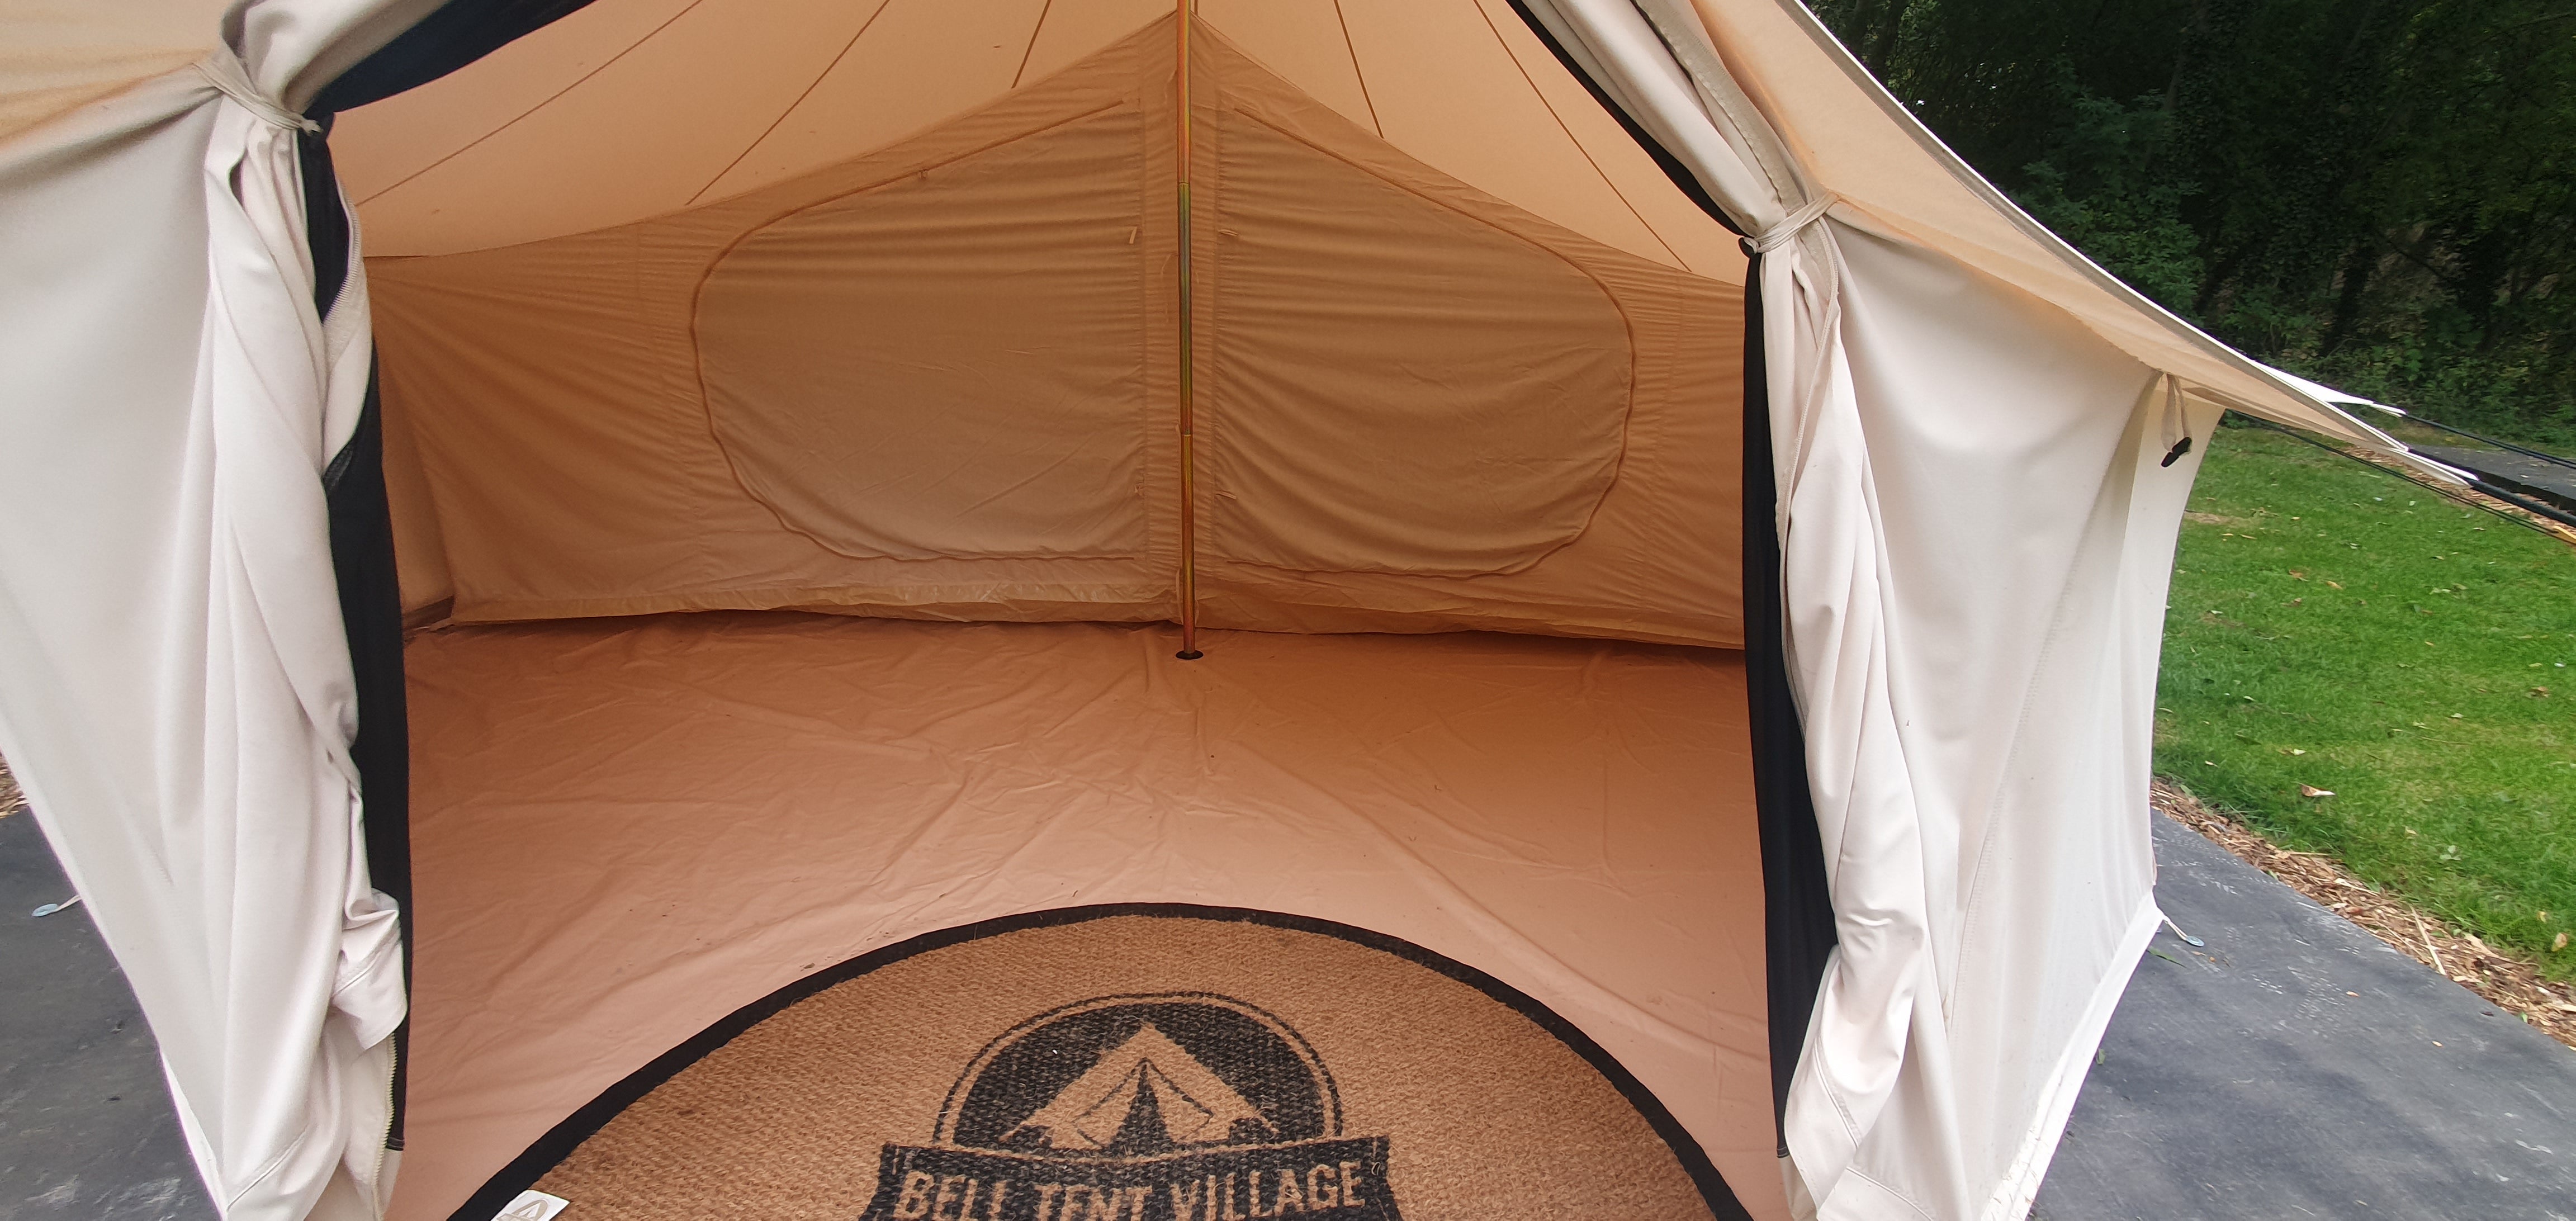 BTV 4 - 4m to 6m XL (1.2m High Walls) Water Resistant & Fire Retardant Cotton Canvas Bell Tent With Stove Hole (Single Door)